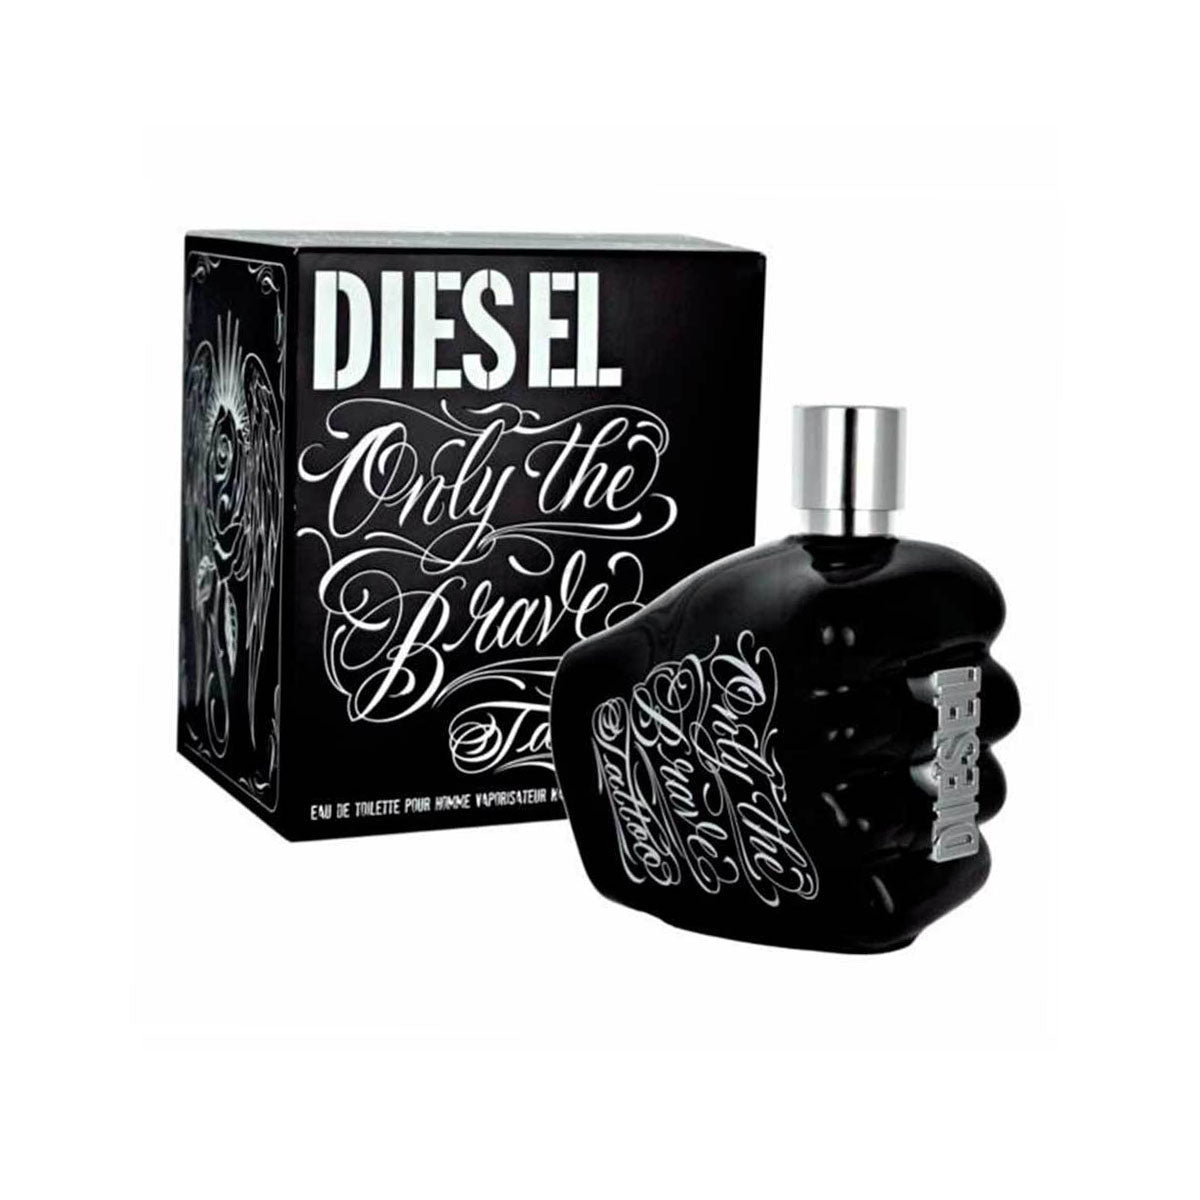 DIESEL ONLY THE BRAVE TATOO 35ml EDT Hombre